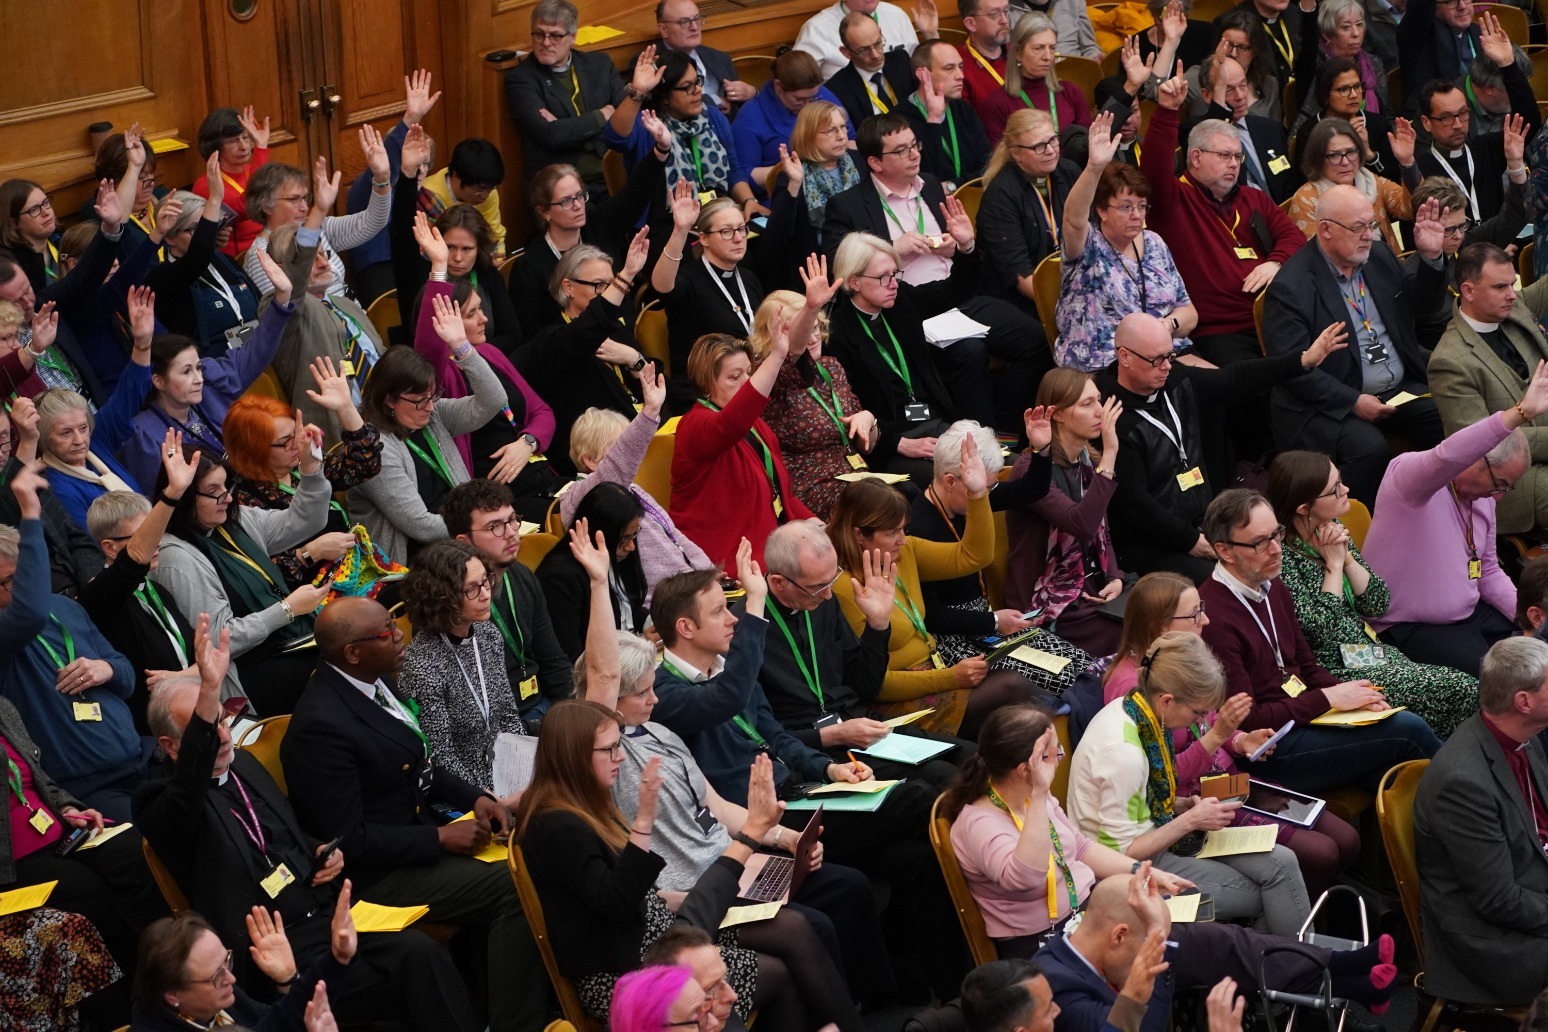 Church of England synod votes in favour of blessings for same-sex couples 